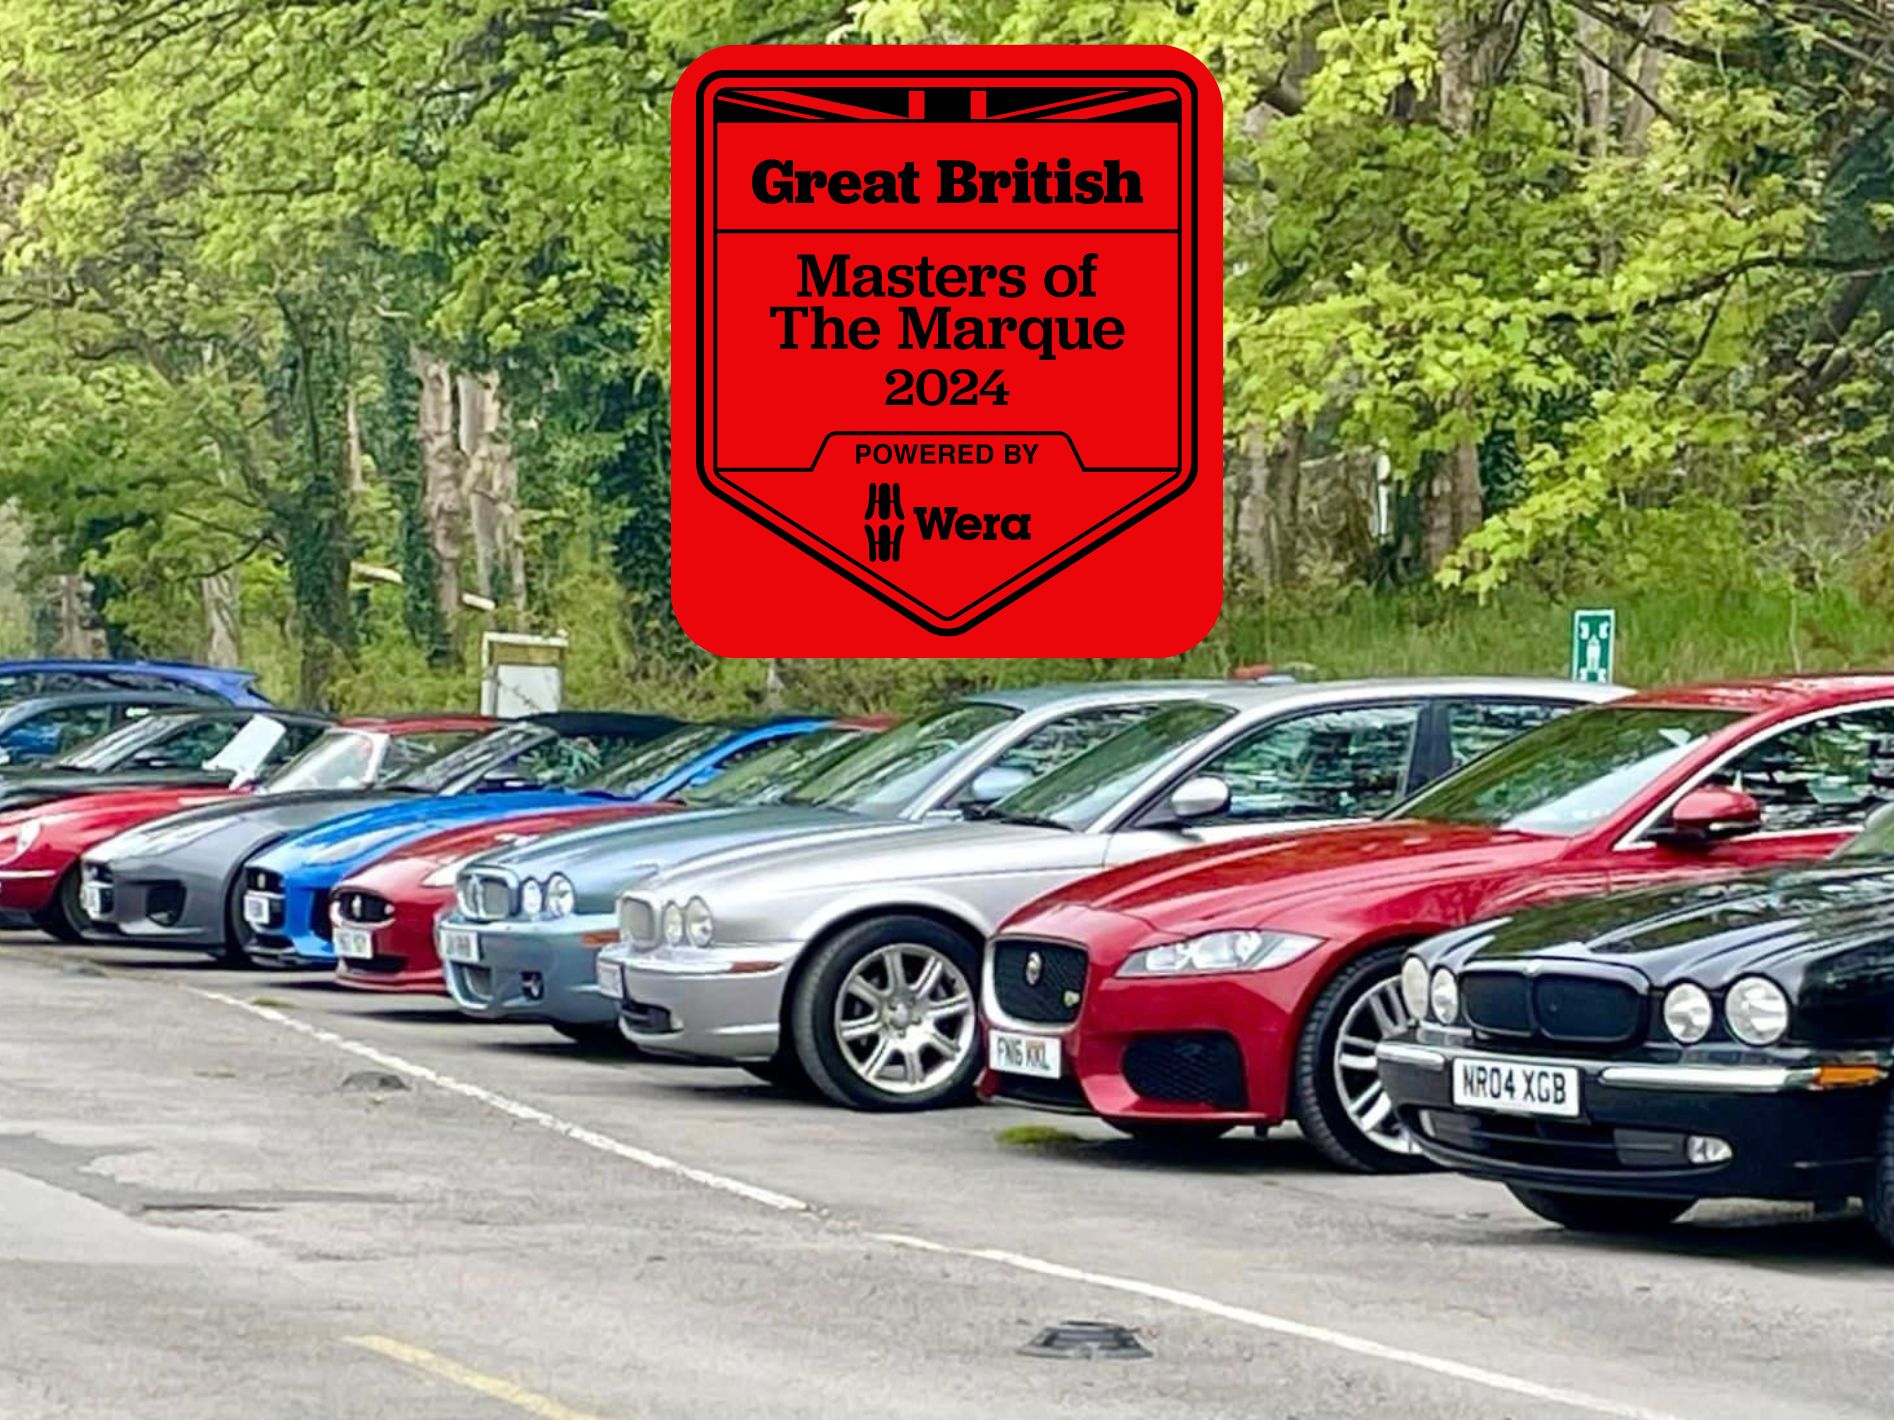 Great British Masters of the Marque - Jaguar Day